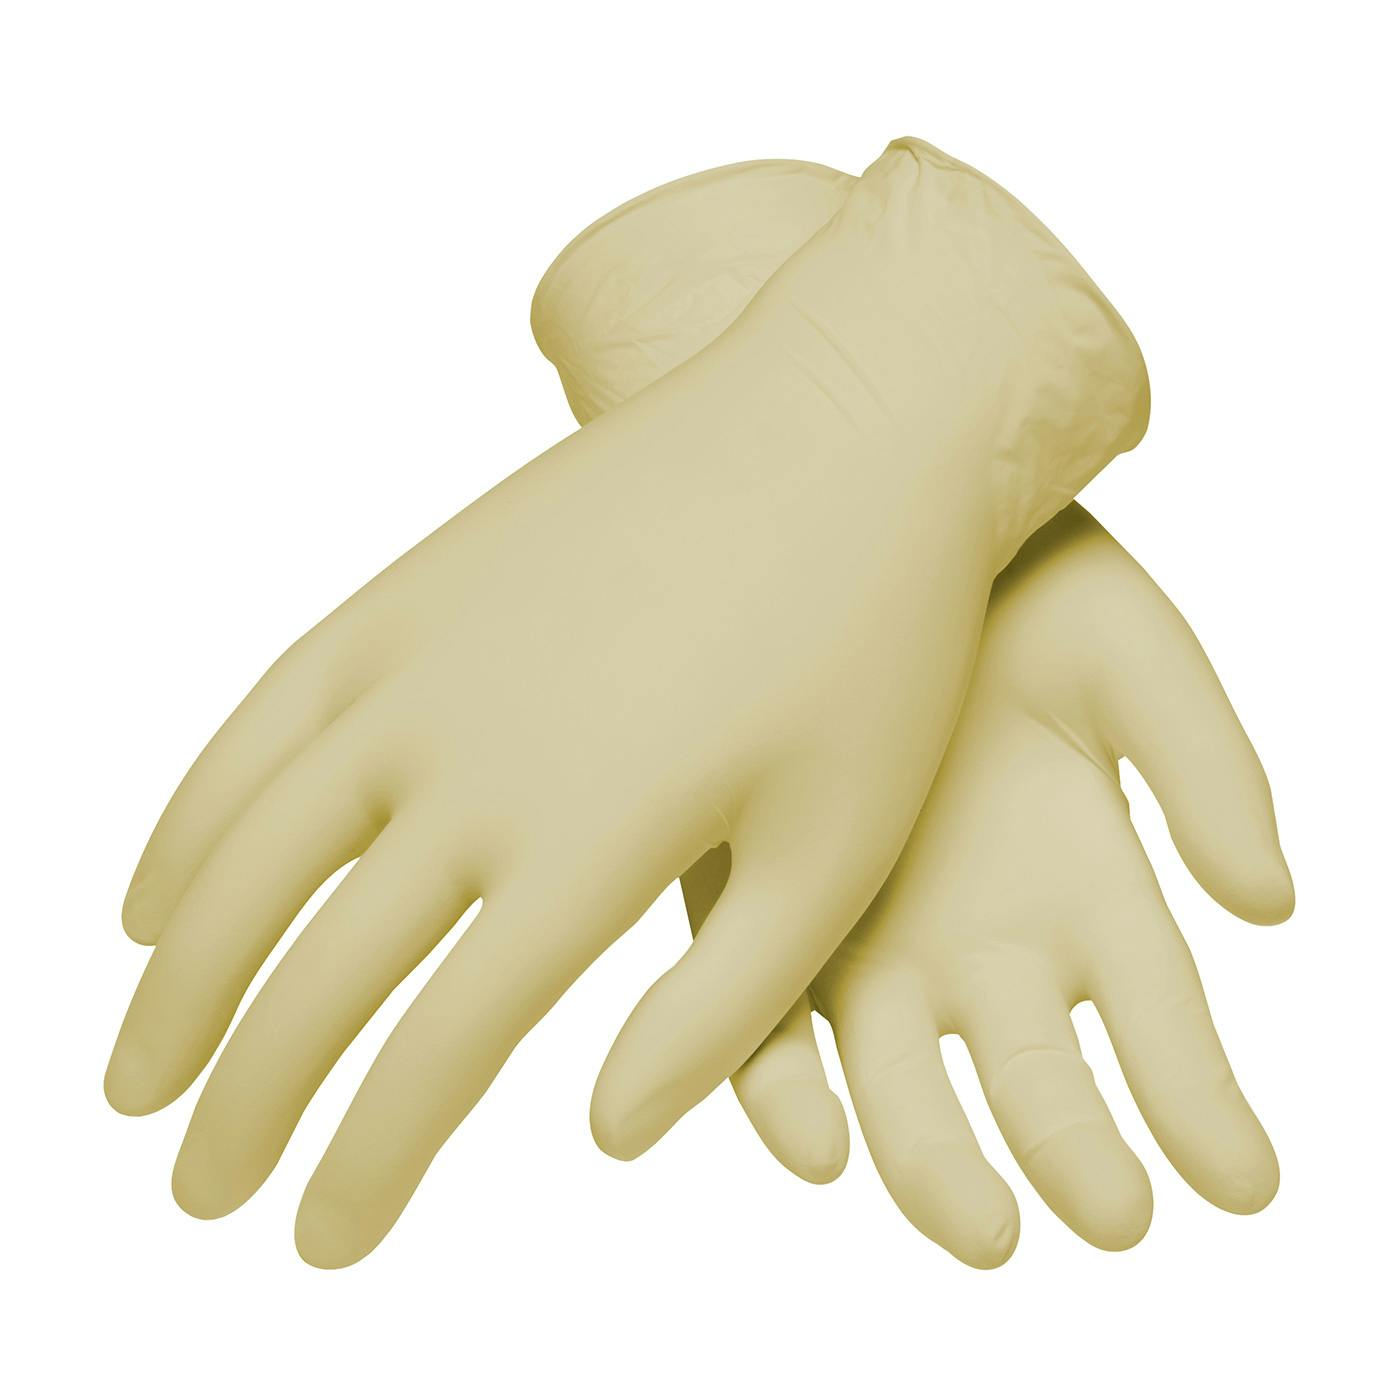 CleanTeam® Single Use Class 100 Cleanroom Latex Glove with Fully Textured Grip - 9.5" (100-322400)